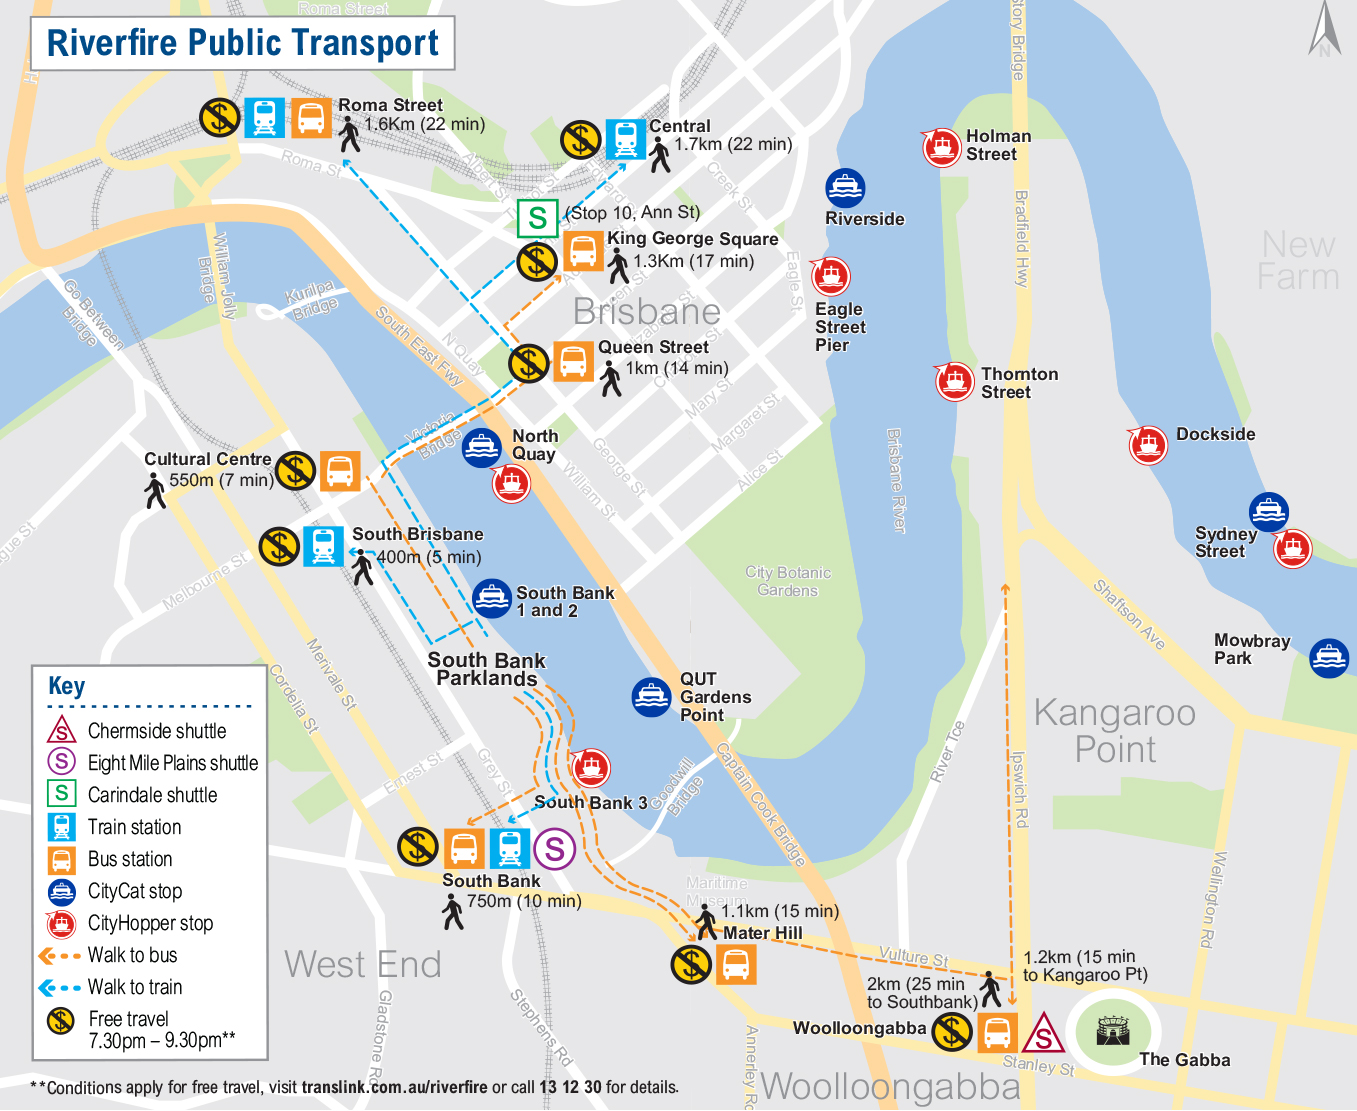 Map showing stops and stations for Riverfire on September 29, 2018